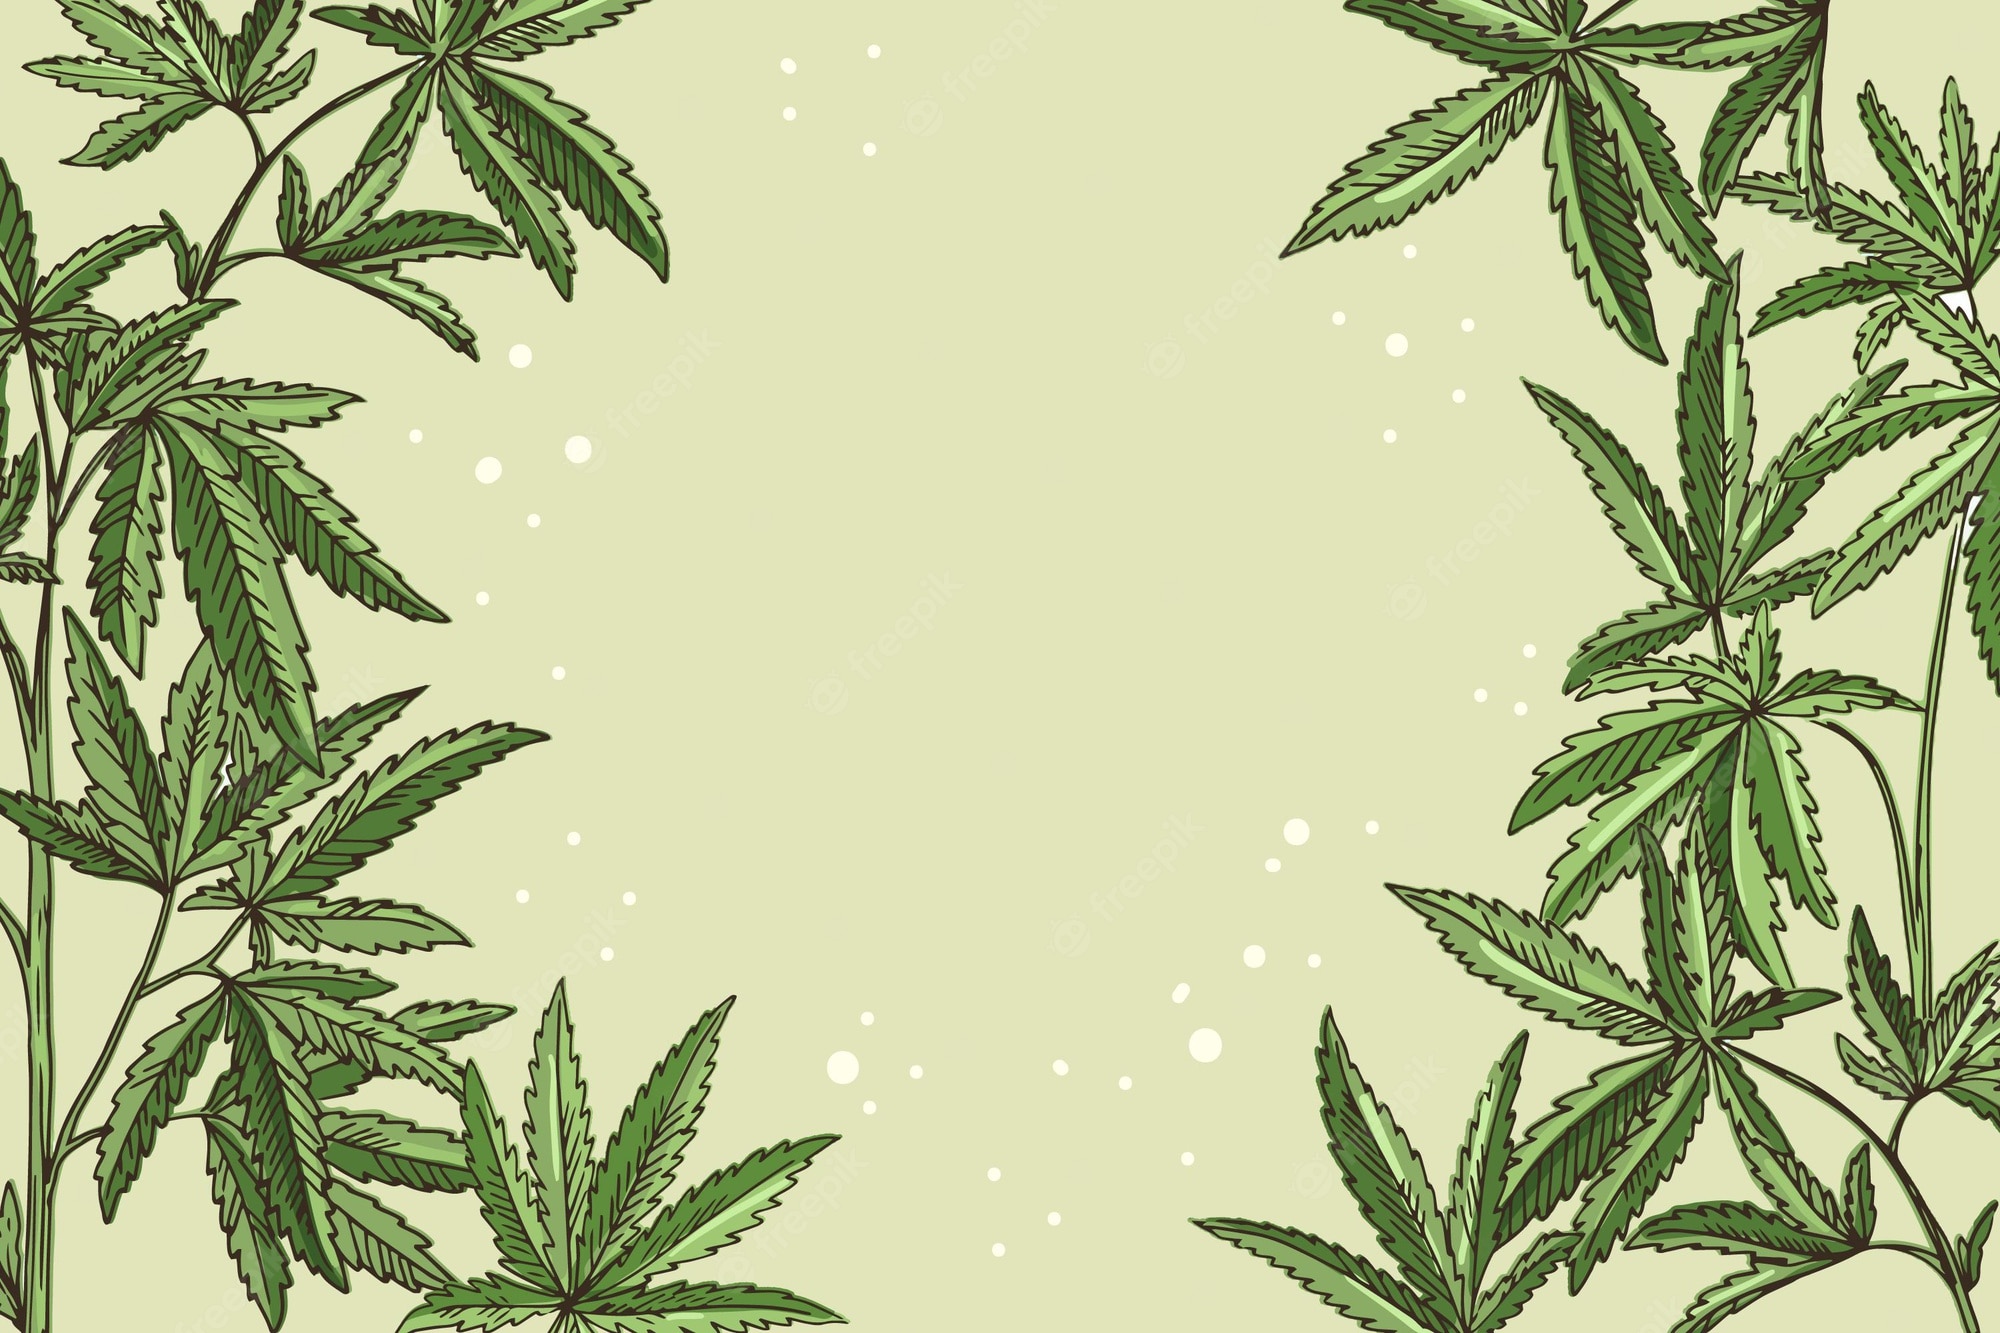 Cannabis background Image. Free Vectors, & PSD